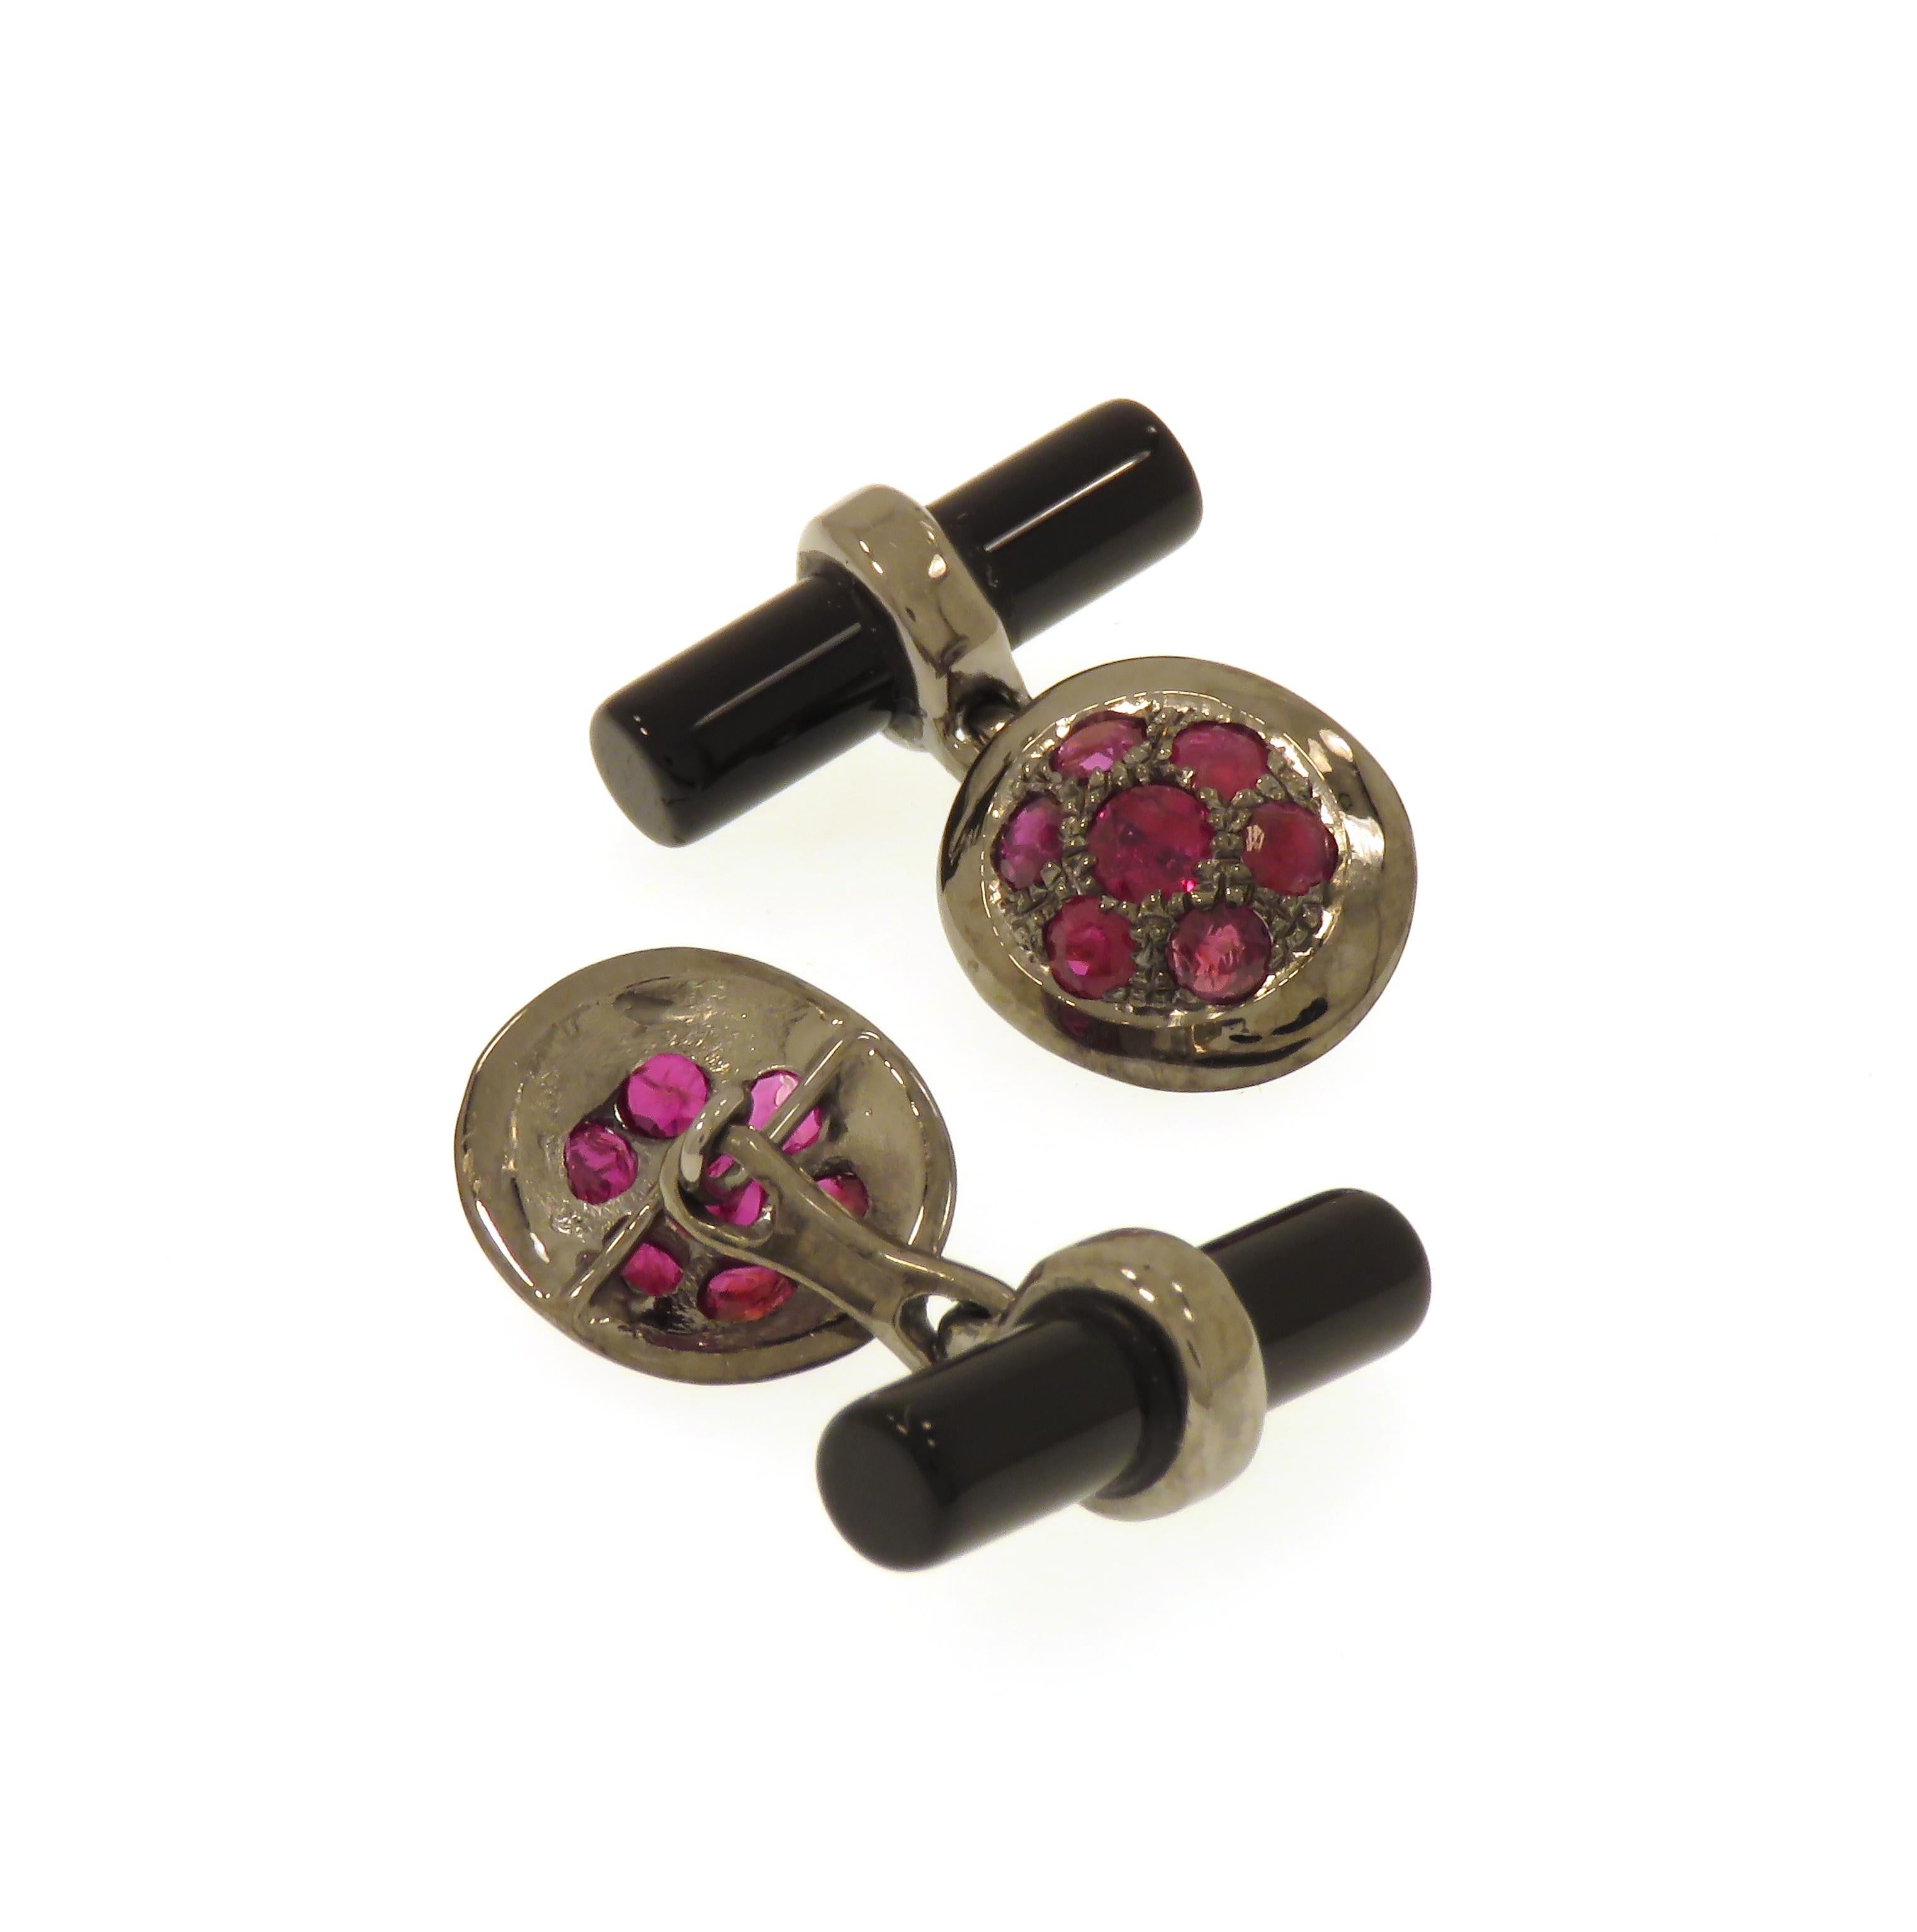 Contemporary Rubies Onyx 9 Karat White Gold Cufflinks Handcrafted in Italy For Sale